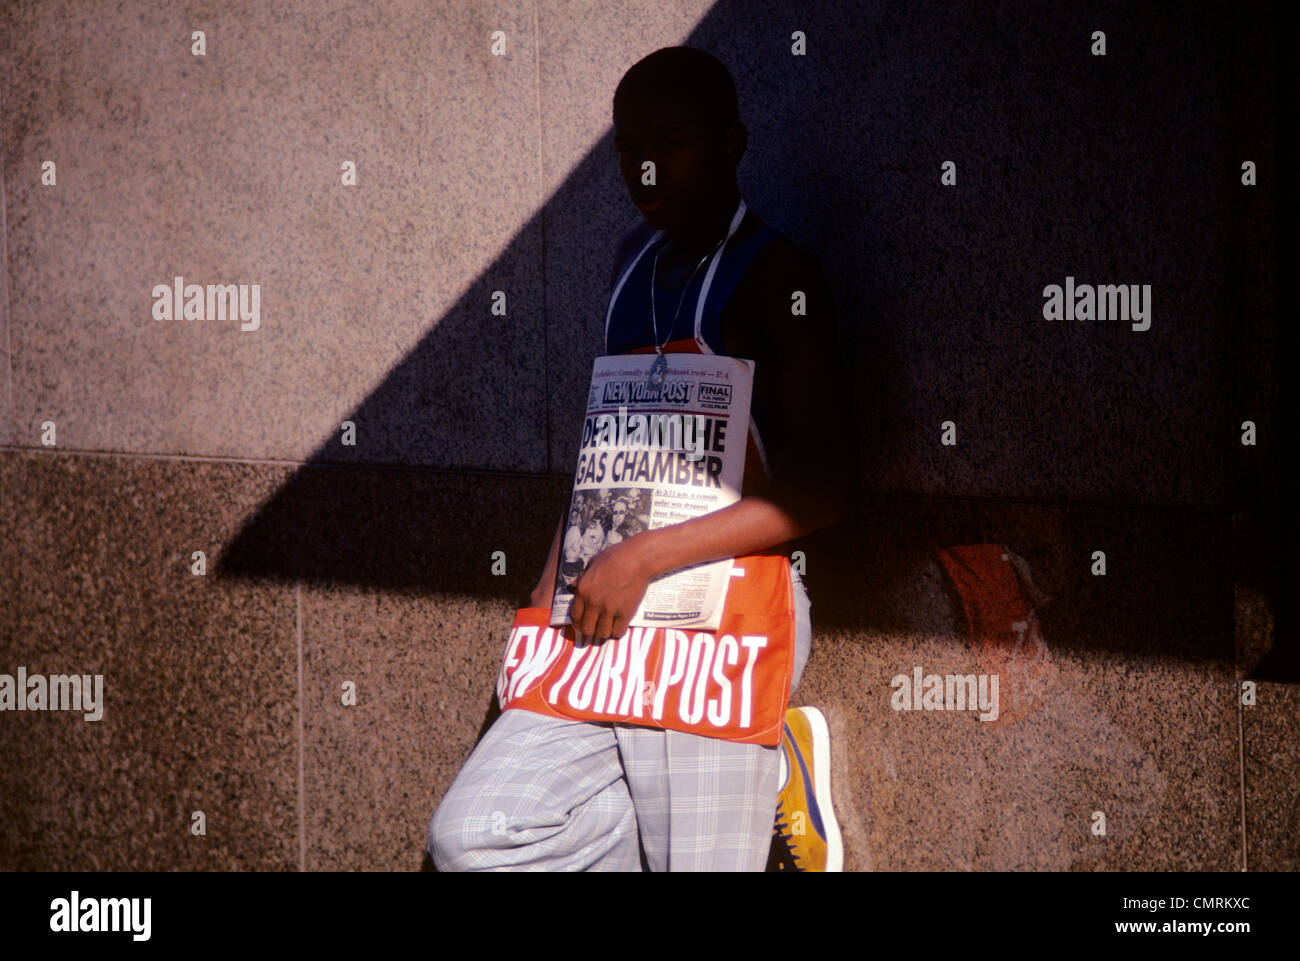 1980 1980s RETRO AFRICAN AMERICAN BOY TEEN SELLING NEW YORK POST NEWSPAPERS Stock Photo